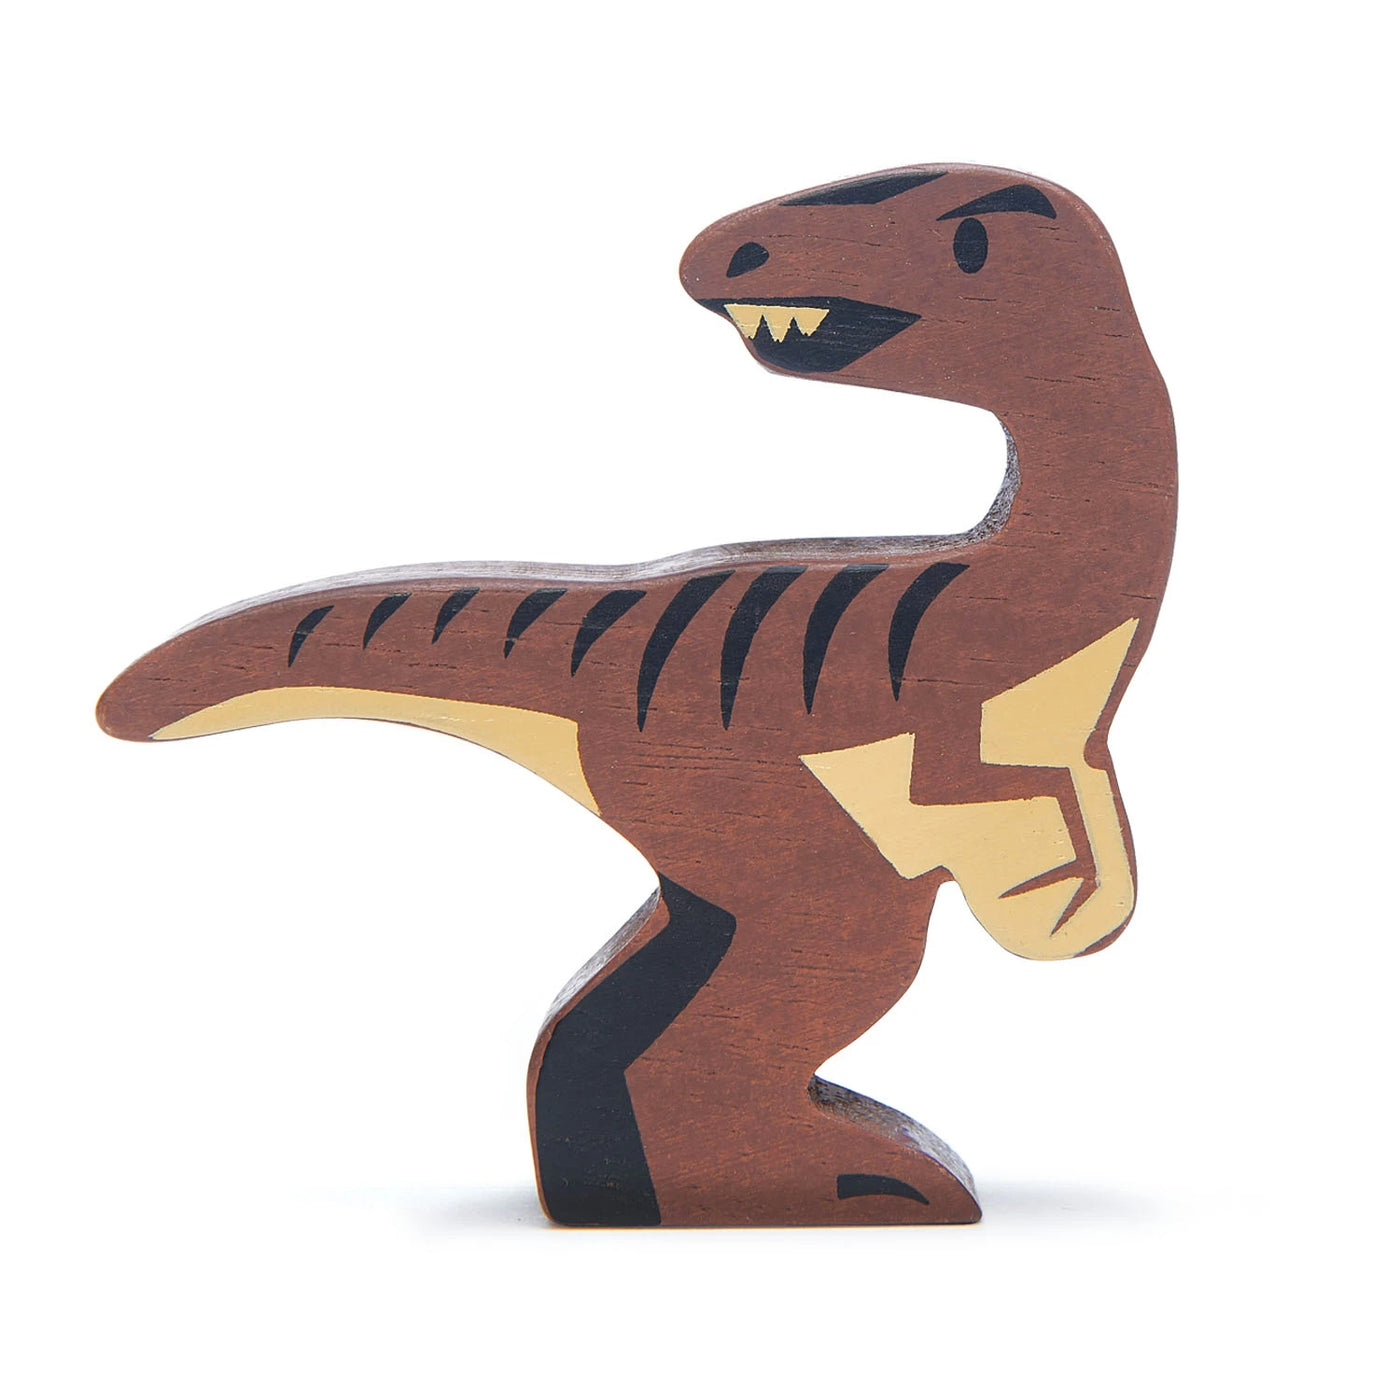 Wooden velociraptor toy dinosaur for kids made of eco-friendly wood